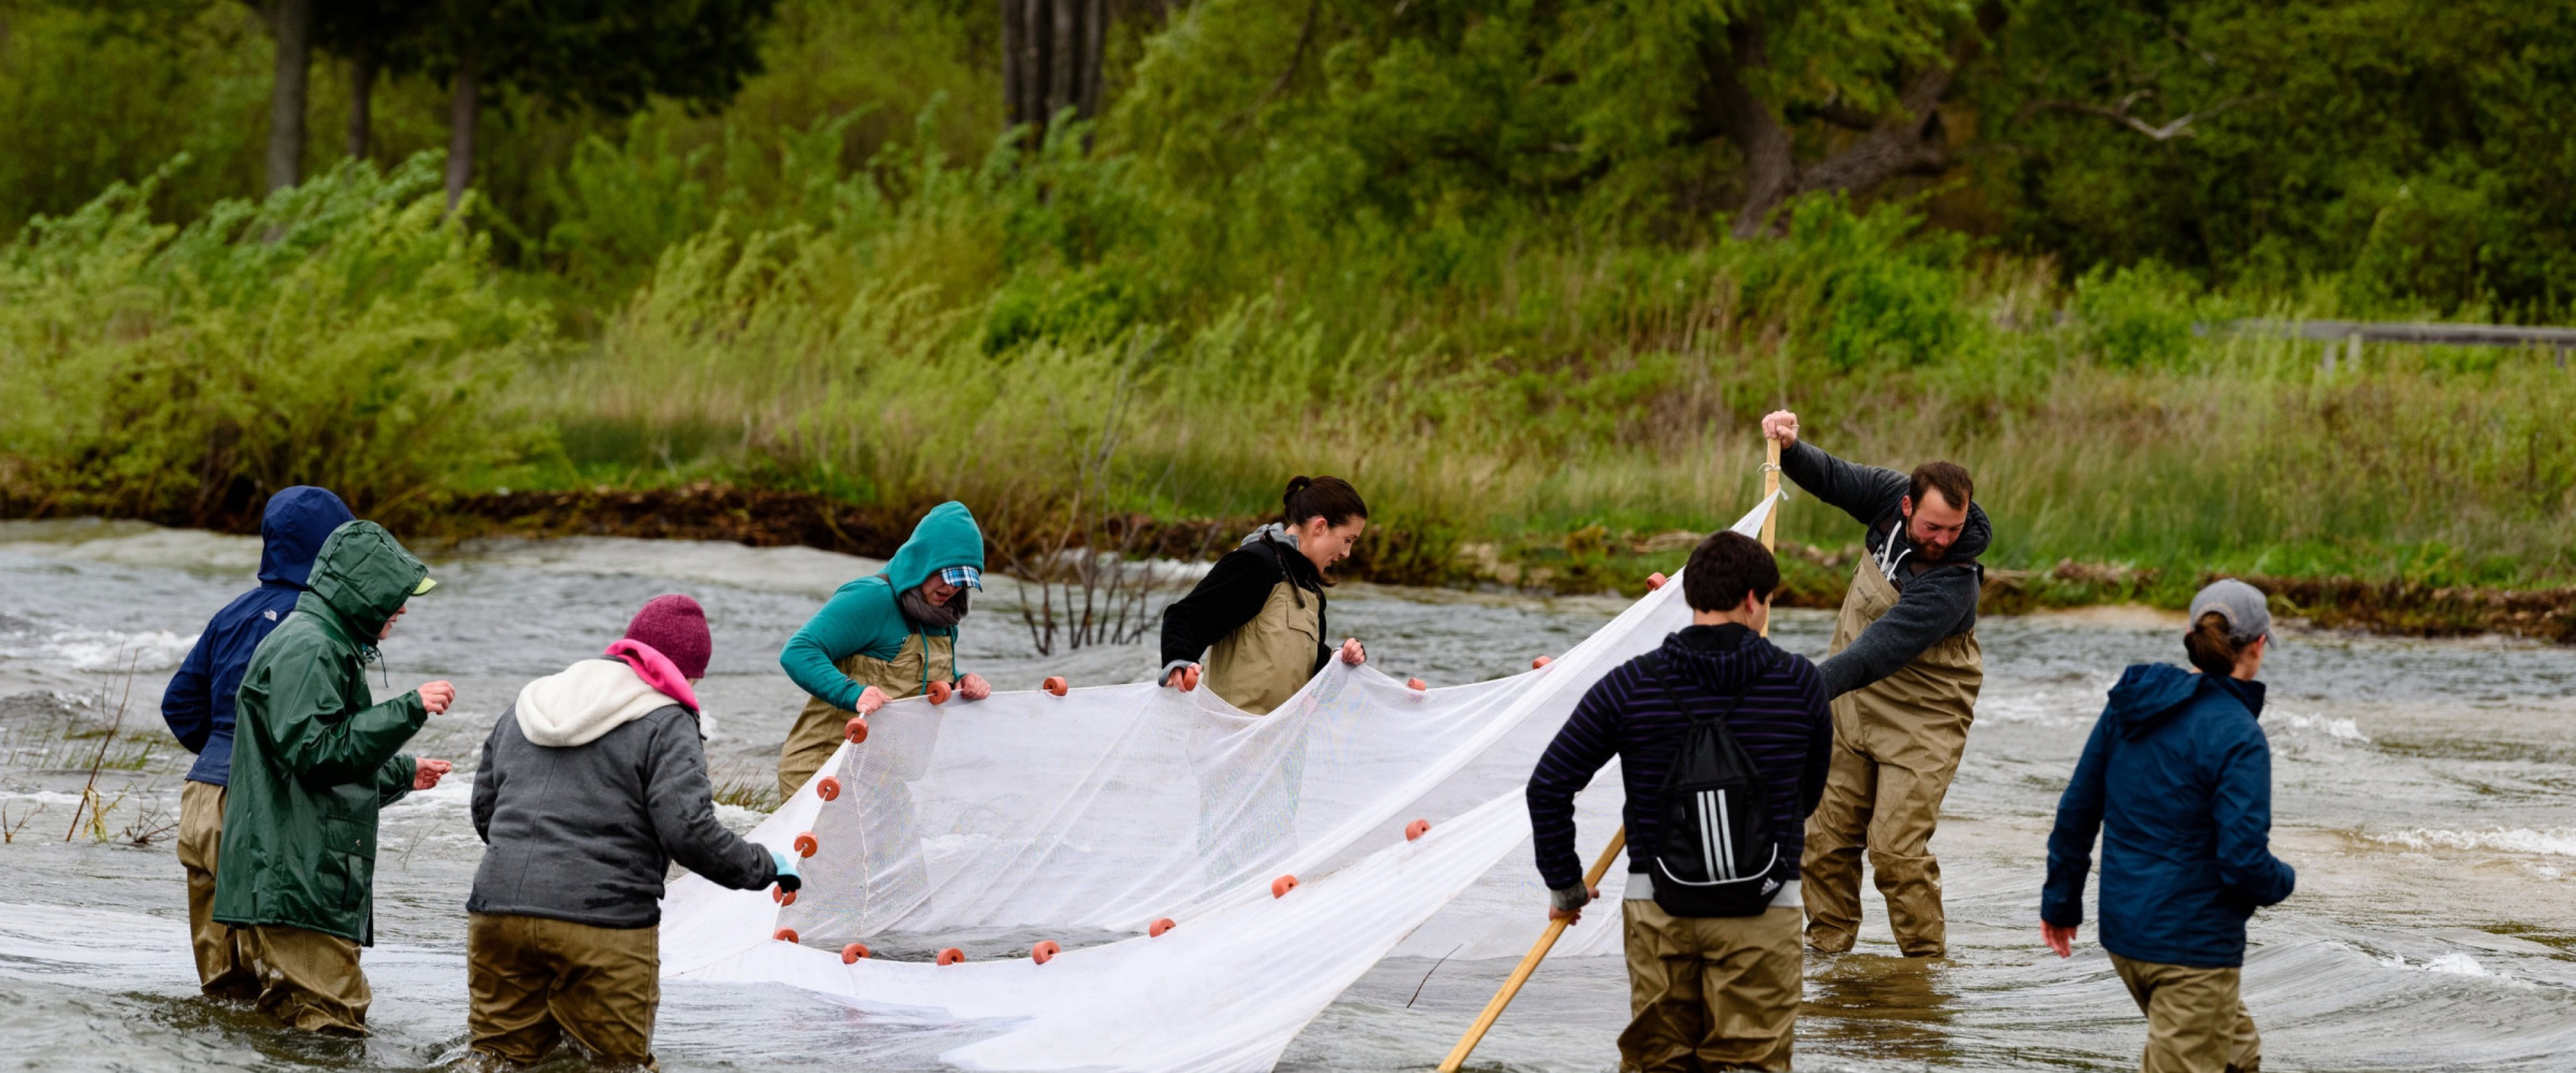 Students in a river hoisting up a trawl